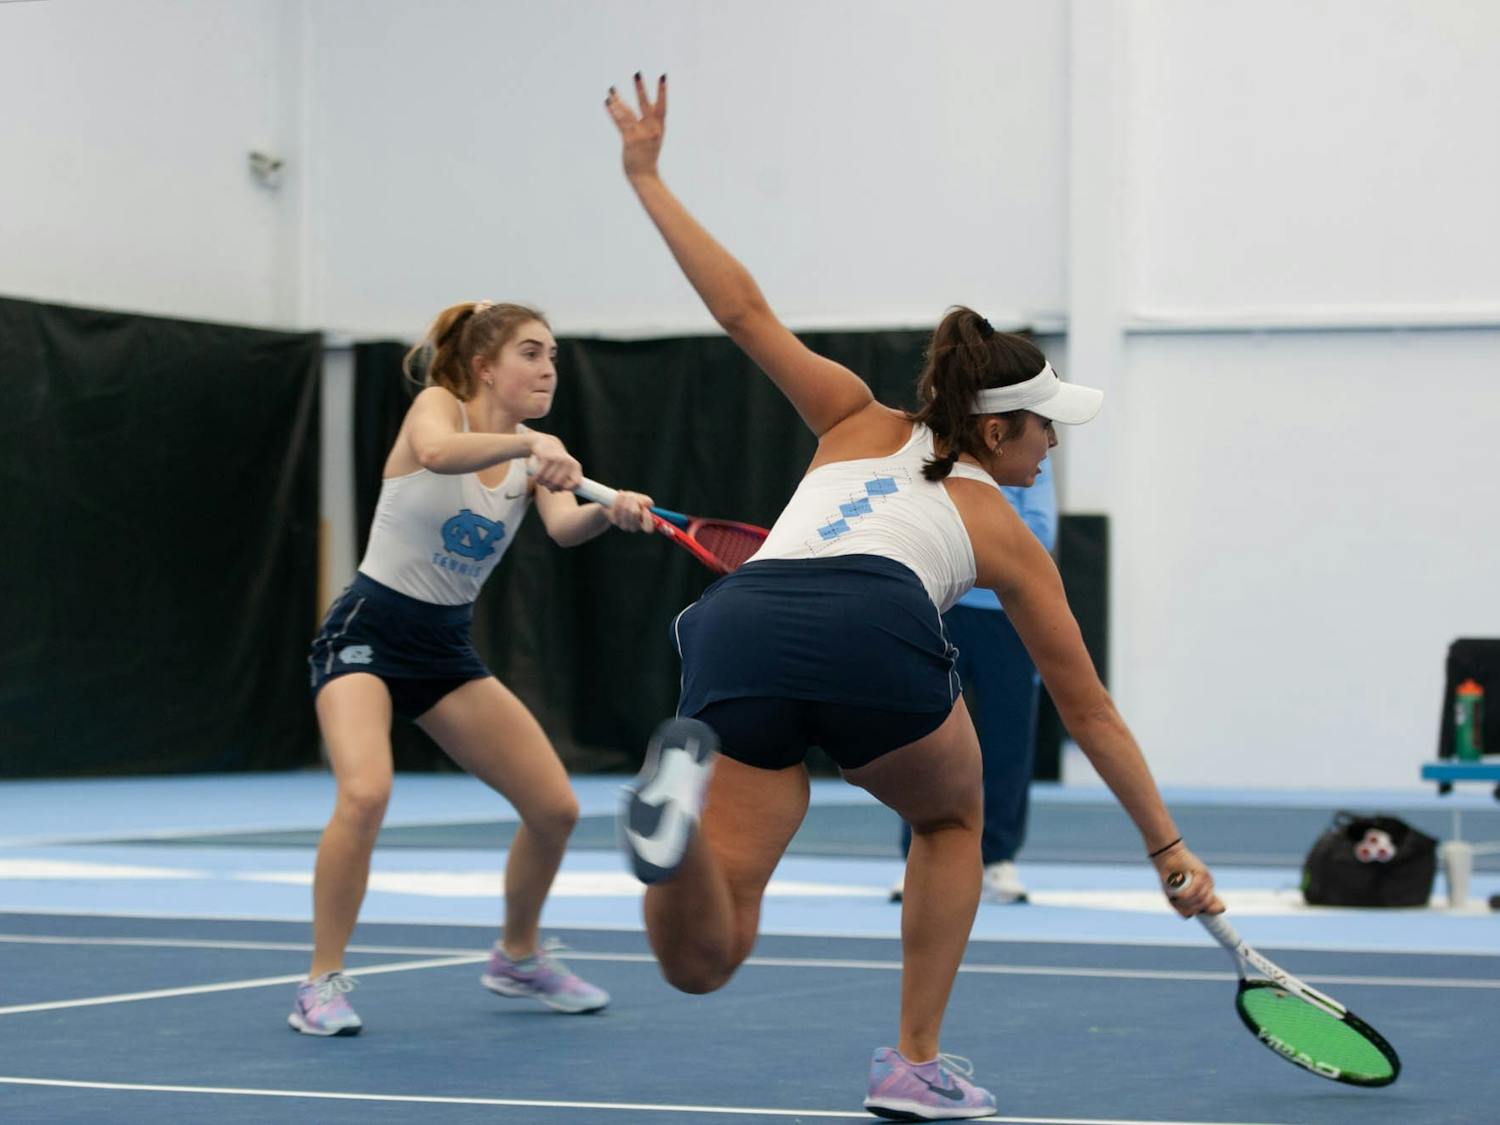 UNC Junior Fiona Crawley and Sophmore Carson Tanguilig return a shot during the Tar Heel 4-0 victory over the Maryland Terrapins in the women's tennis matches on Friday, Jan 27 2023 at The Cone-Kenfield Tennis Center.